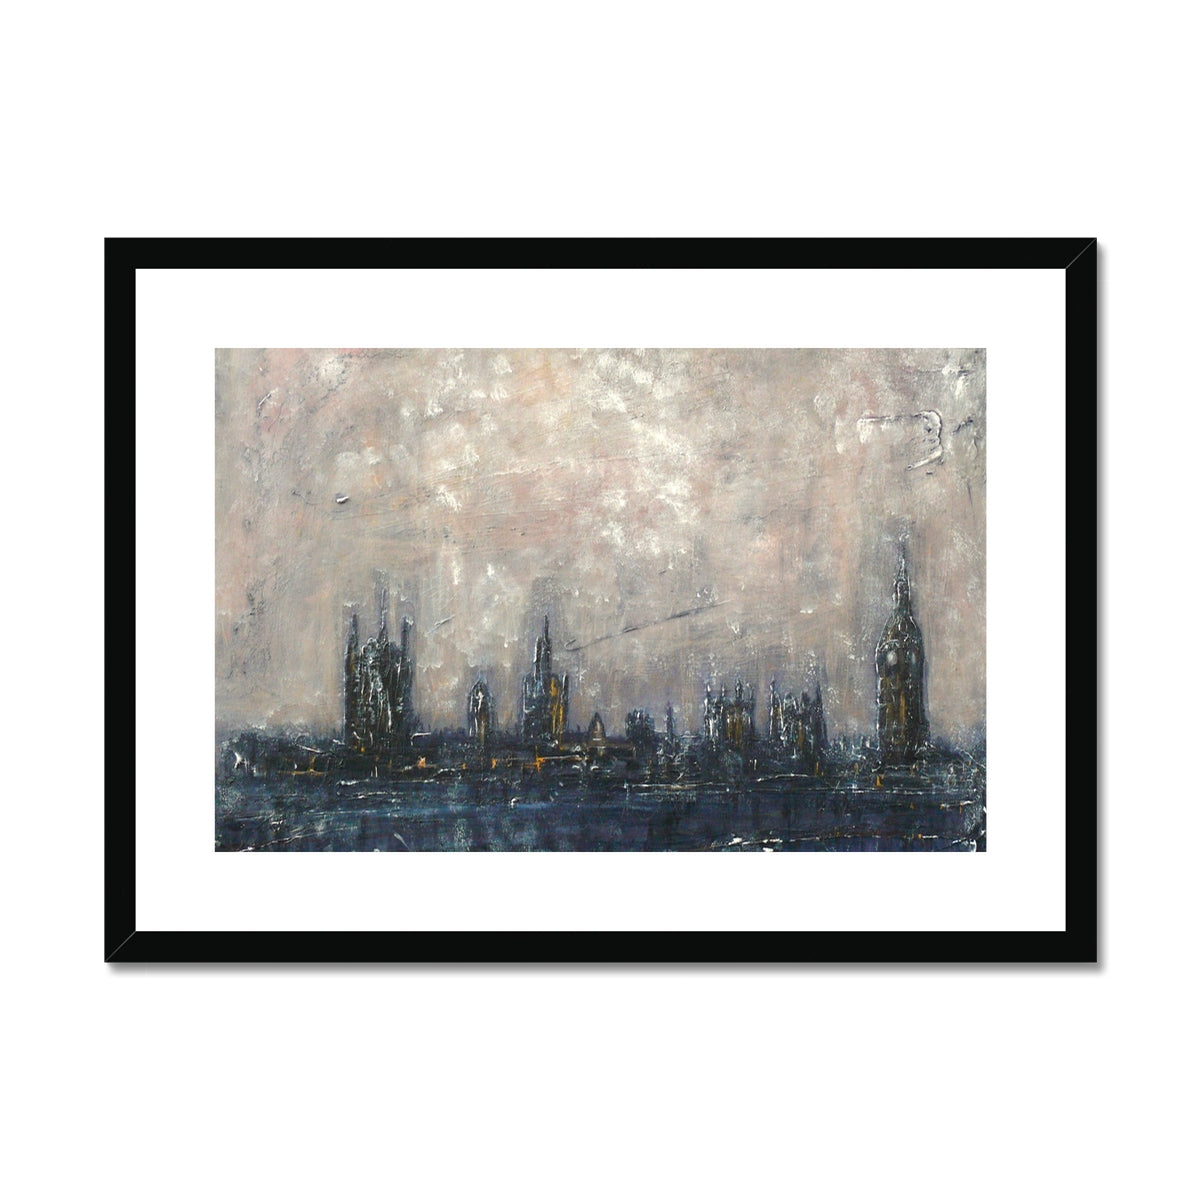 Winter In London Painting | Framed & Mounted Prints From Scotland-Framed & Mounted Prints-World Art Gallery-A2 Landscape-Black Frame-Paintings, Prints, Homeware, Art Gifts From Scotland By Scottish Artist Kevin Hunter